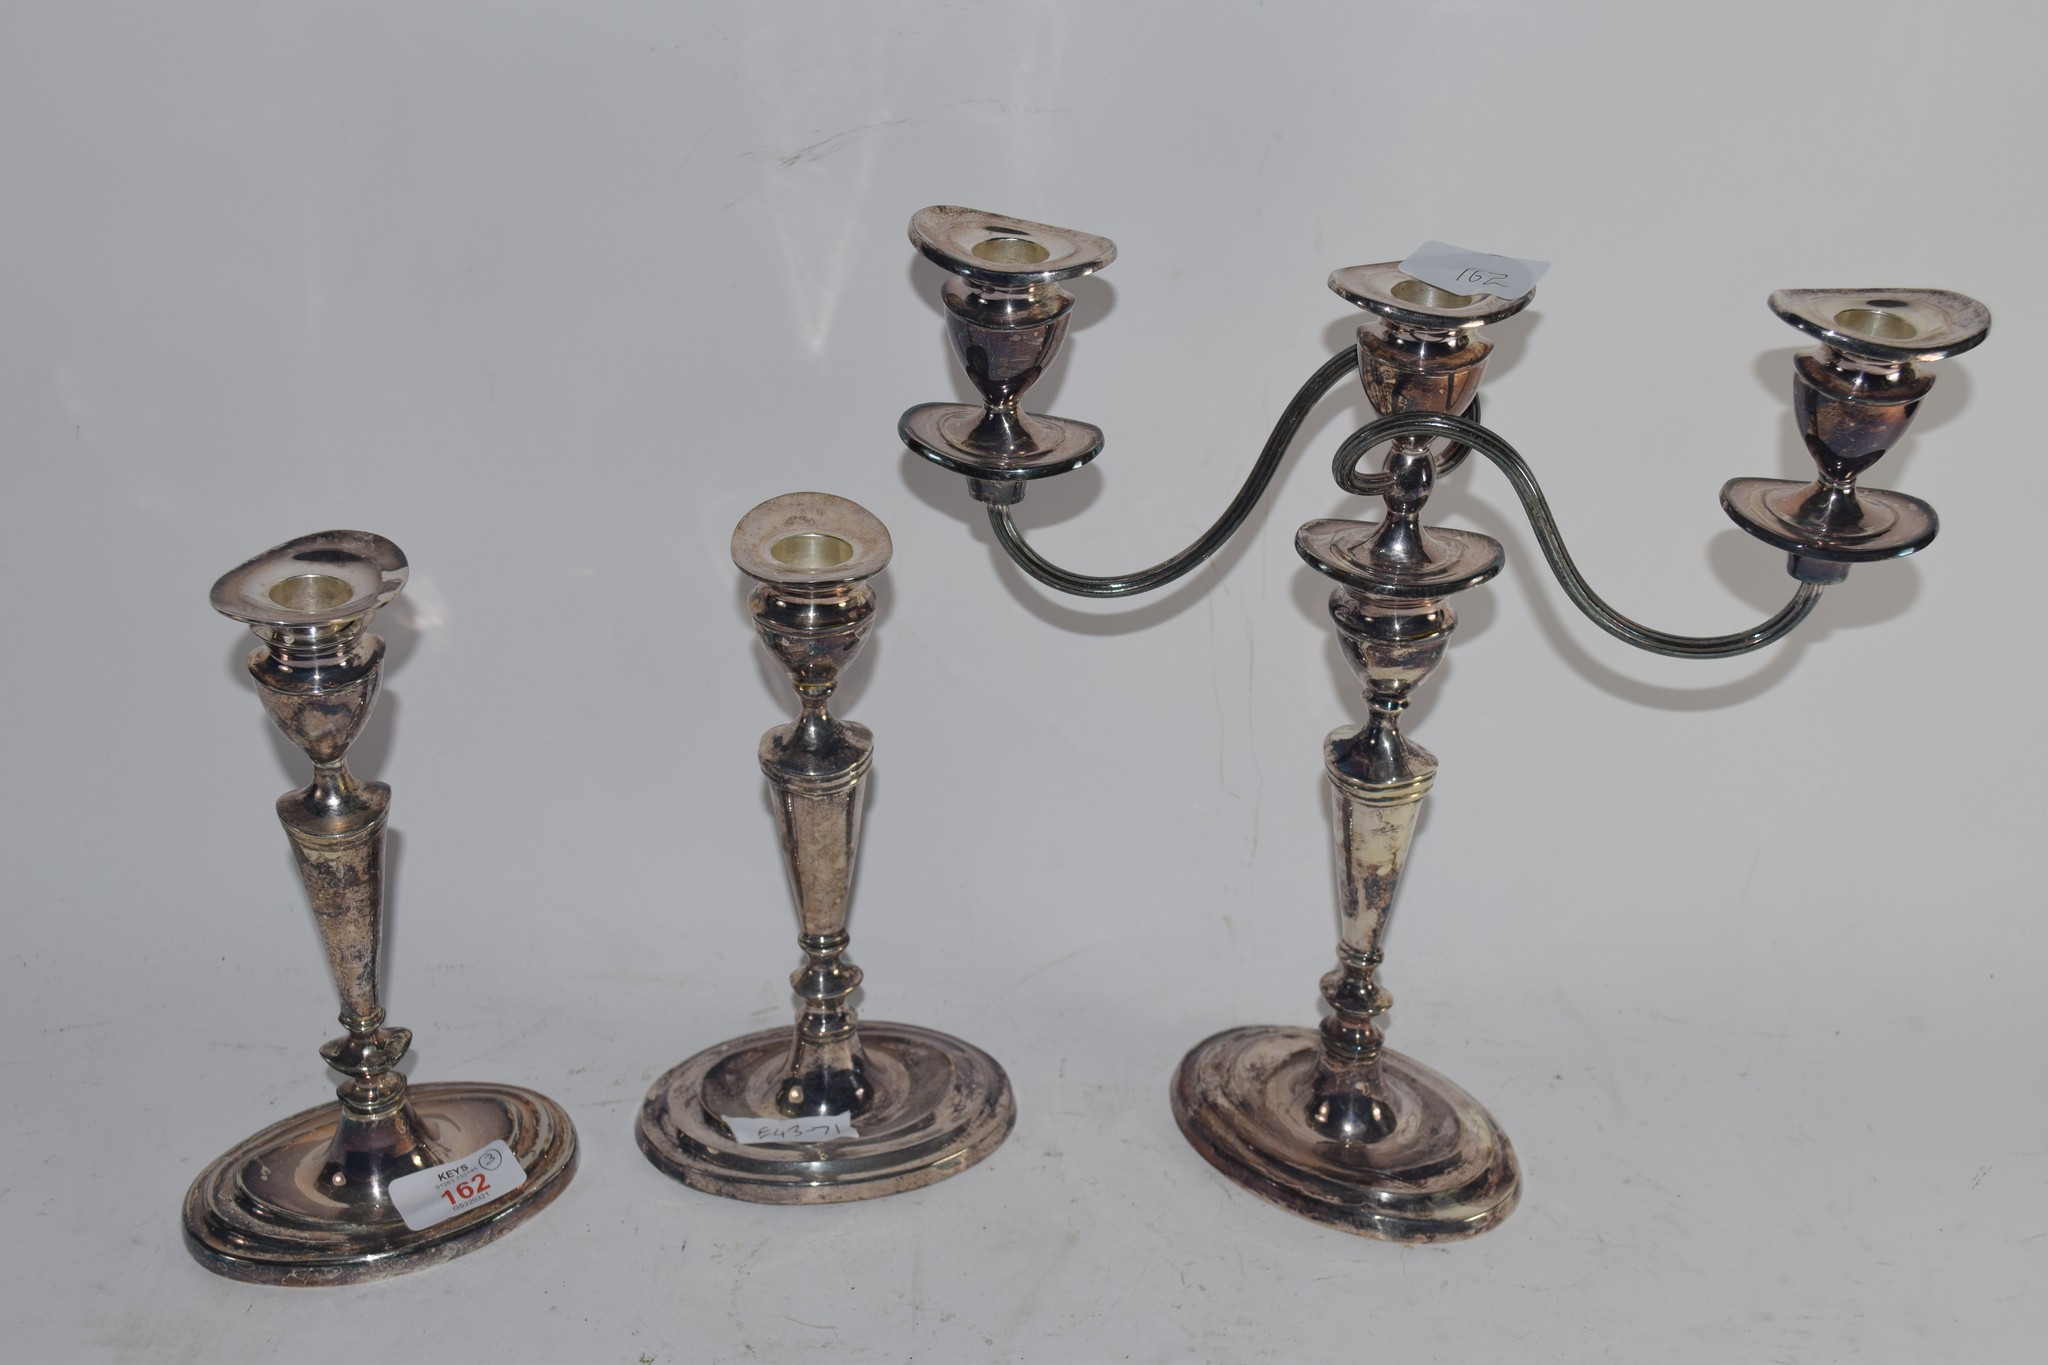 PAIR OF PLATED CANDLESTICKS AND FURTHER PLATED CANDELABRA